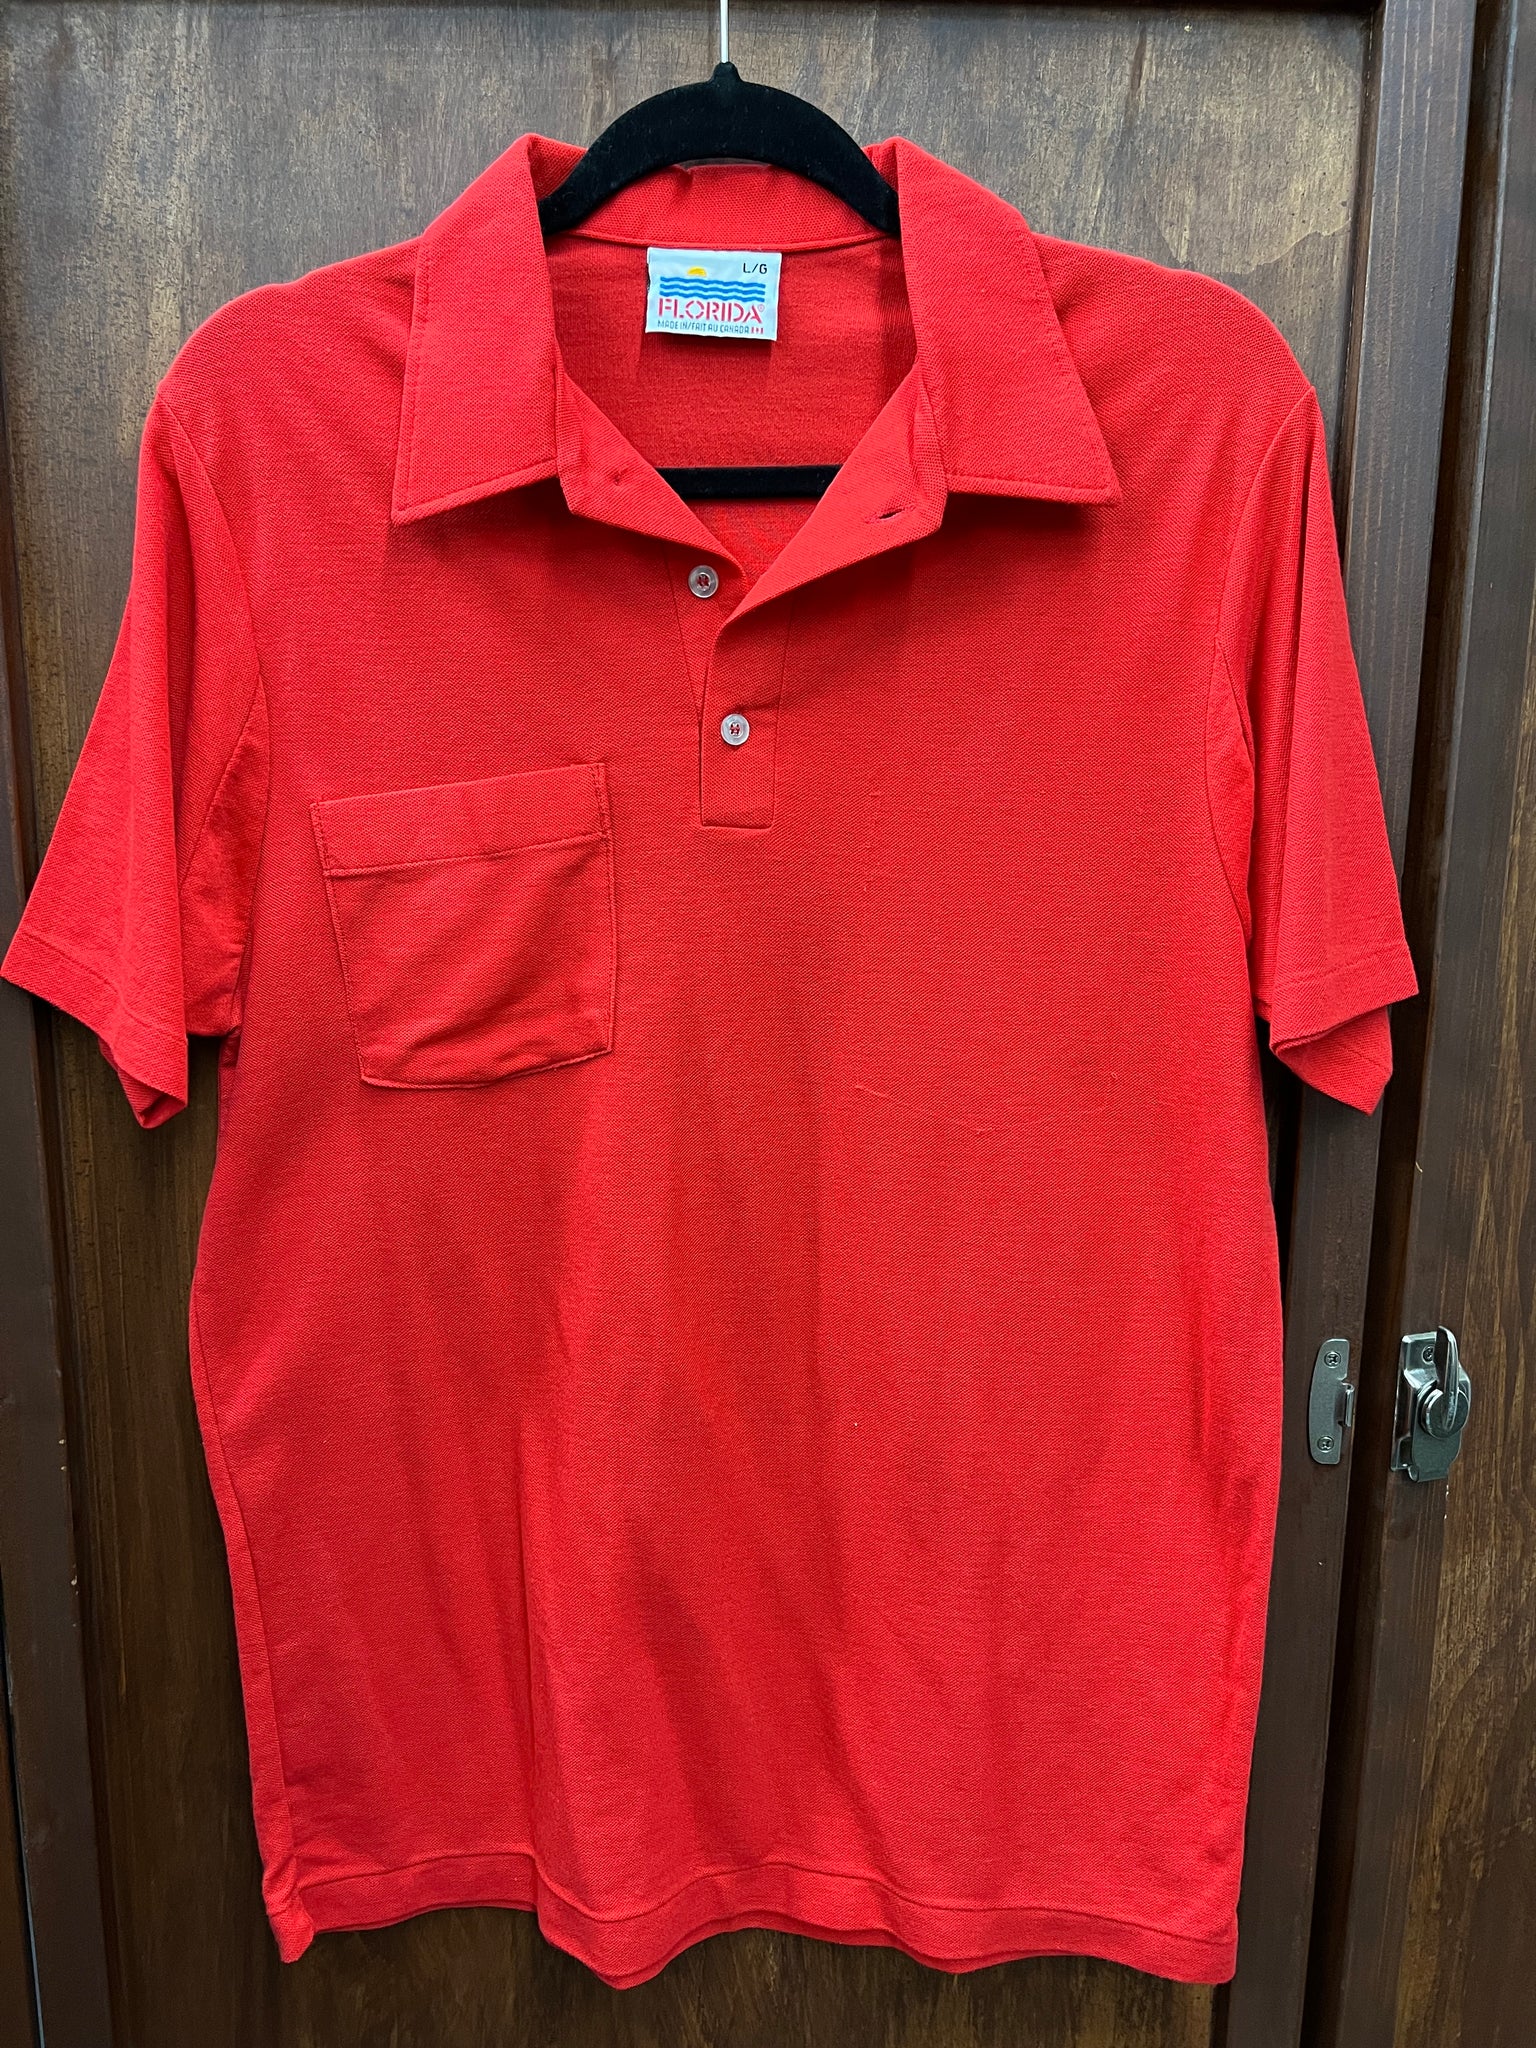 1970s MENS TOP- Florida red polo s/s (AS IS)